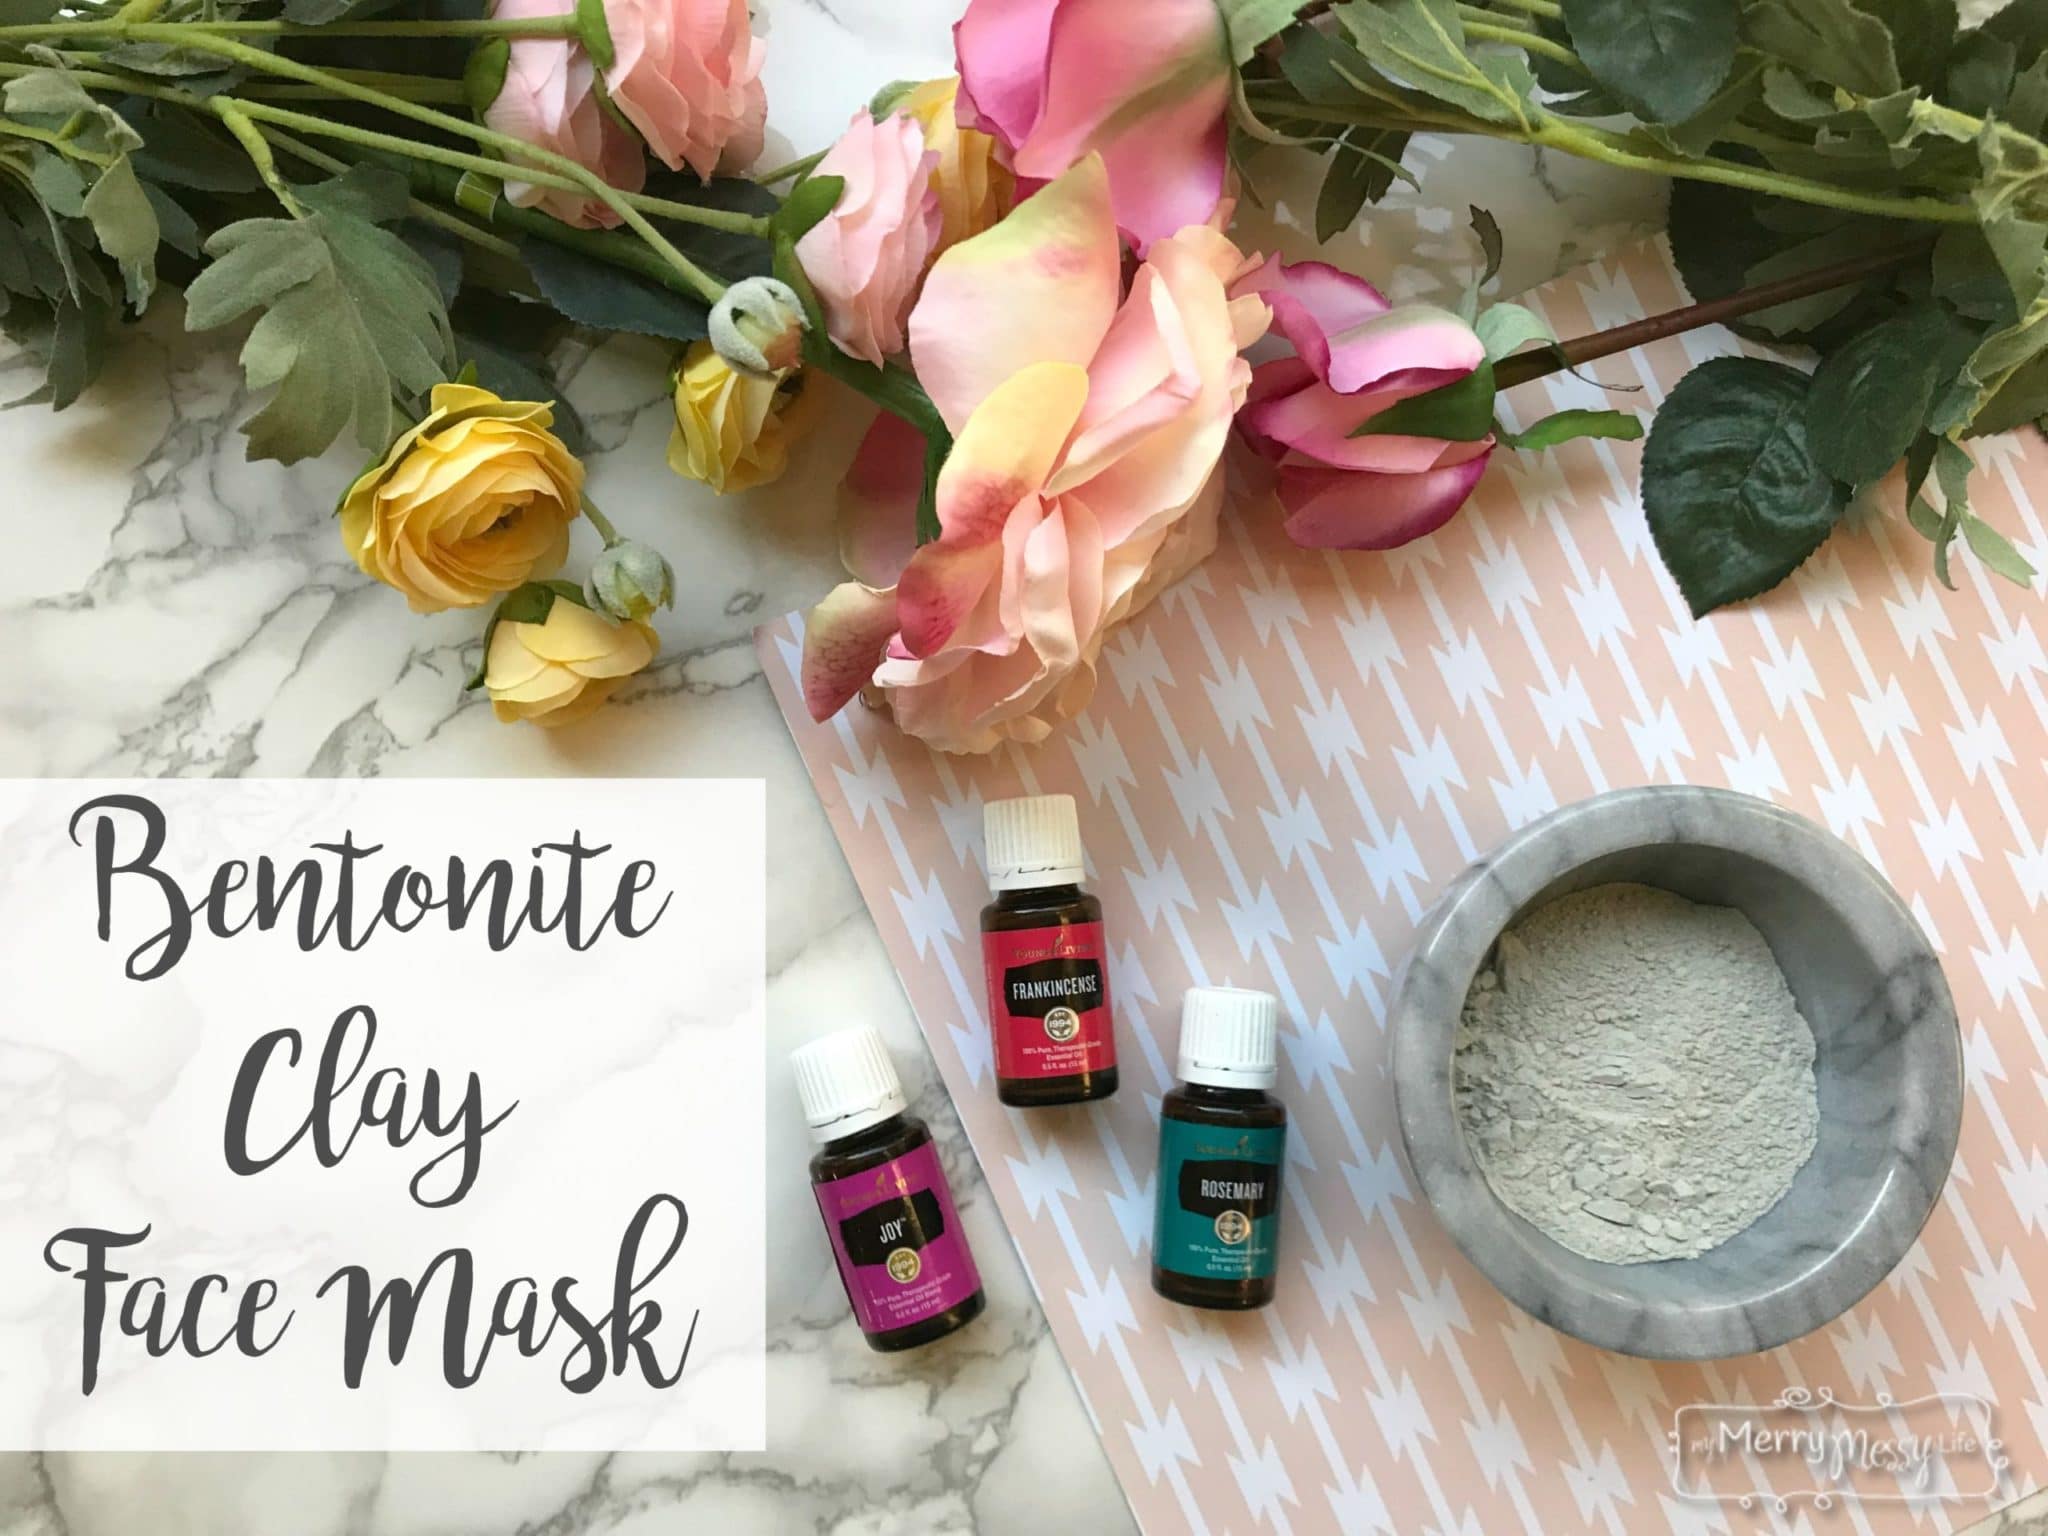 DIY Natural Bentonite Clay Face Mask to Shrink Pores, Detoxify and Clean with Apple Cider Vinegar, Bentonite Clay and Essential Oils